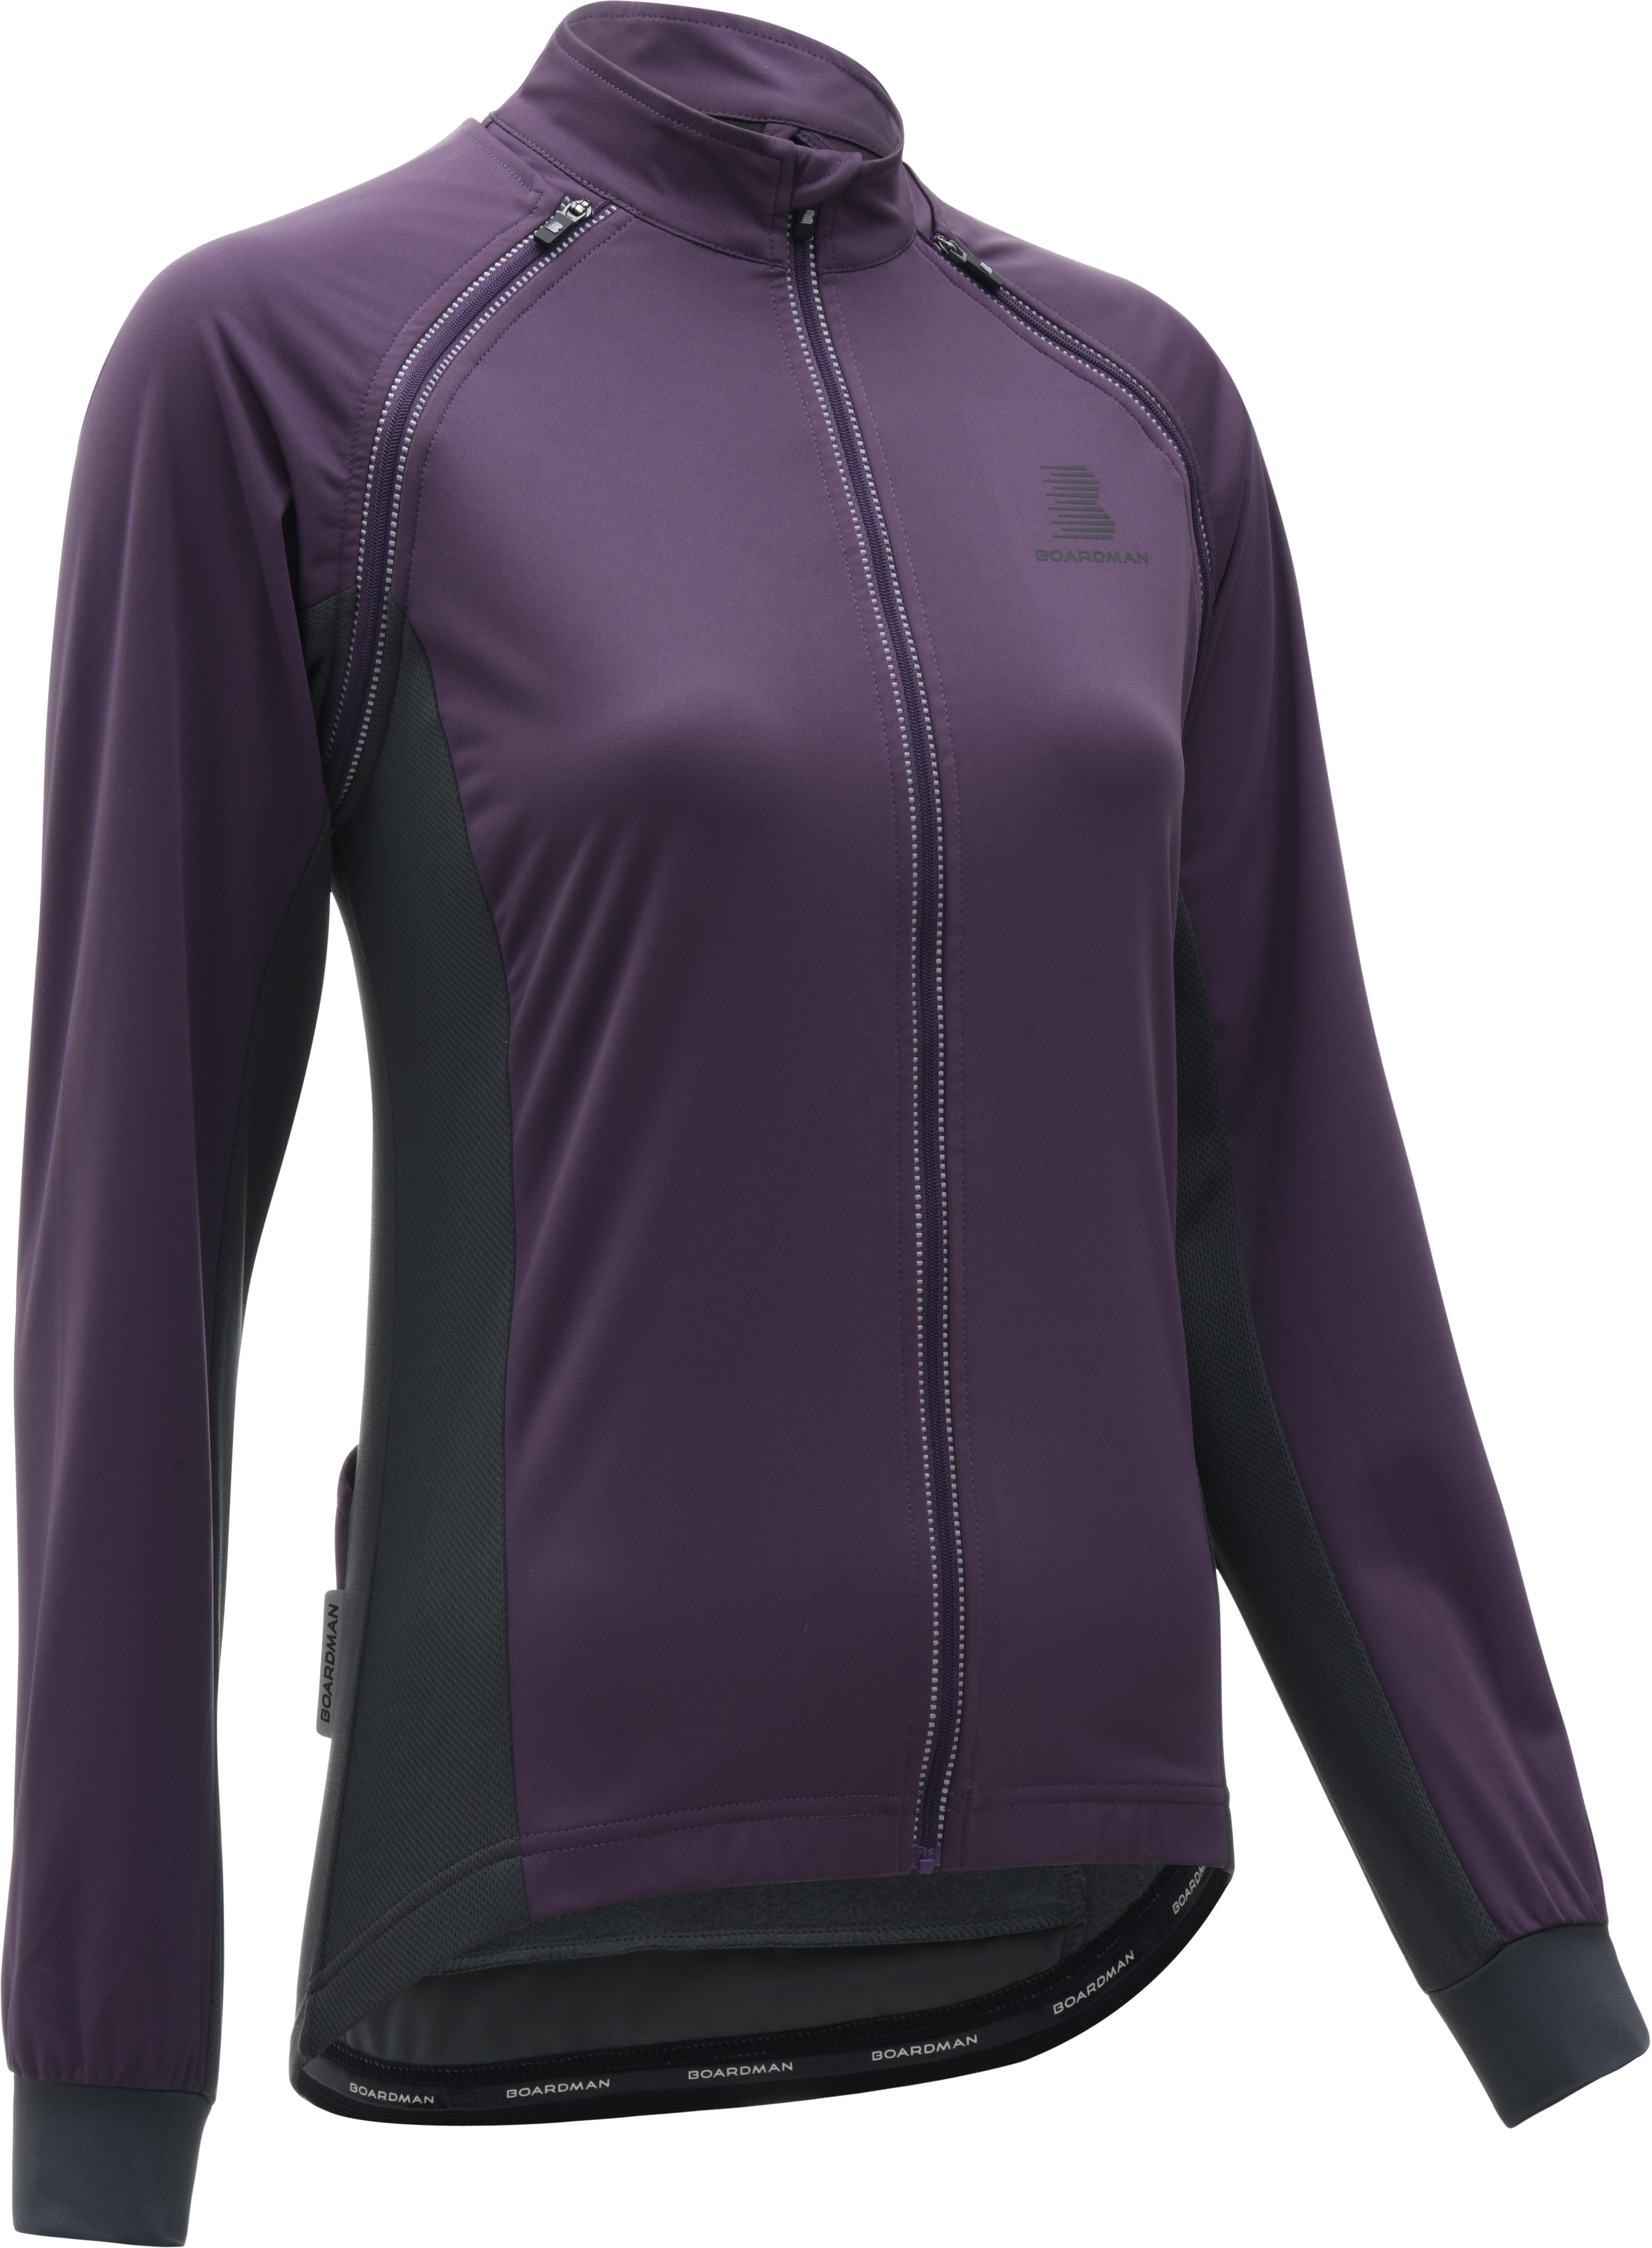 womens cycling jacket with zip off sleeves